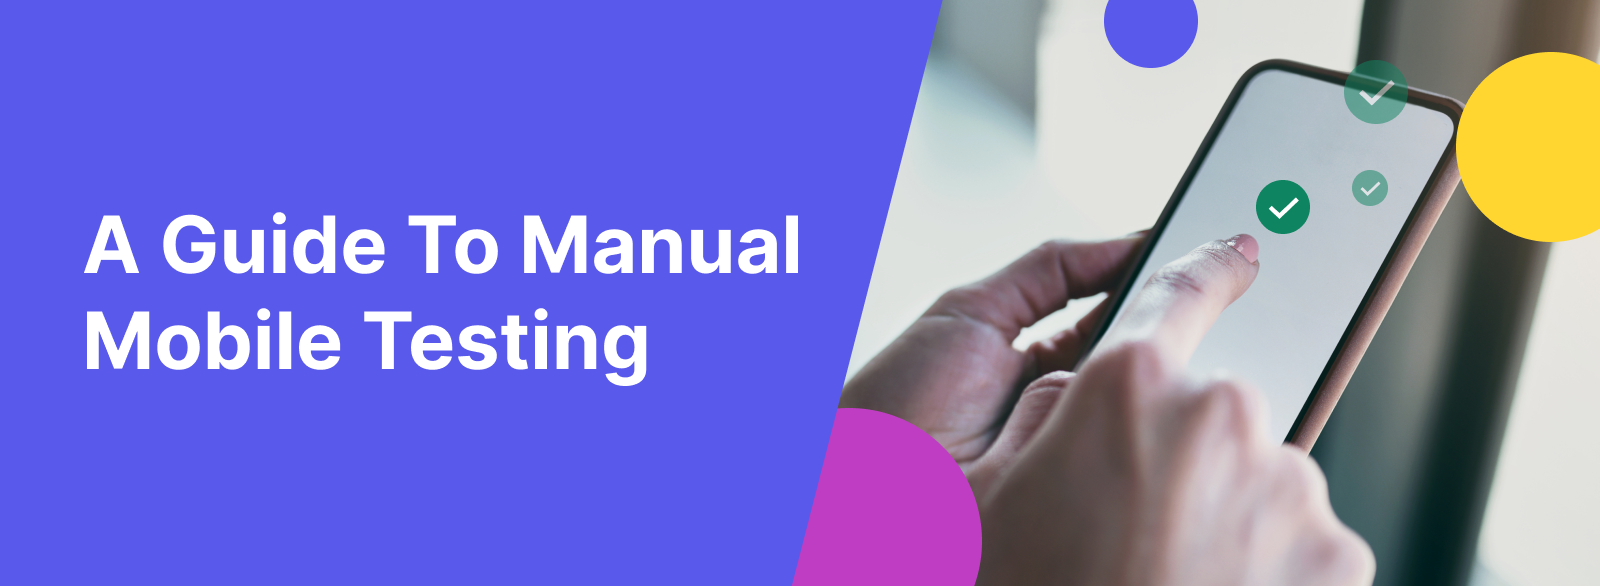 A Complete Guide To Manual mobile testing with Katalon